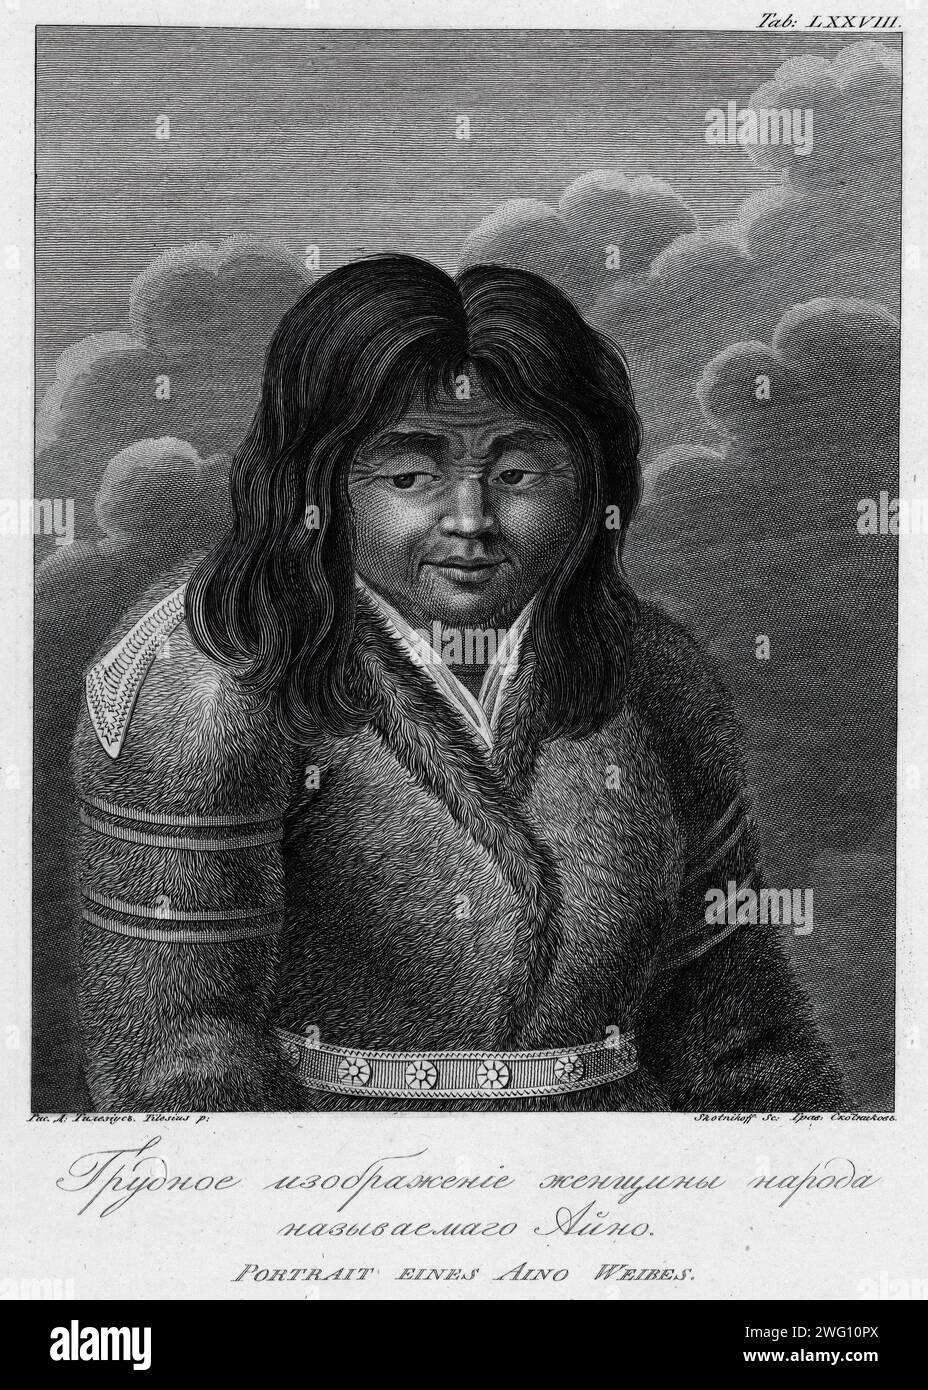 Illustration of an Ainu Woman, 1813. In 1803-06, Captain I. F. Kruzenshtern became the first Russian to circumnavigate the globe. This atlas, published by the Russian Academy of Sciences in 1813, includes maps of Kruzenshtern's route and 109 plates based upon the drawings of V. G. Tilesius, a doctor, naturalist, and the official artist of the expedition. It is one of the largest publications of engravings from tsarist Russia. The subjects depicted include views of Sakhalin, Kamchatka, and the Kurile Islands; representations of Siberian natives and other peoples encountered during the voyage; a Stock Photo